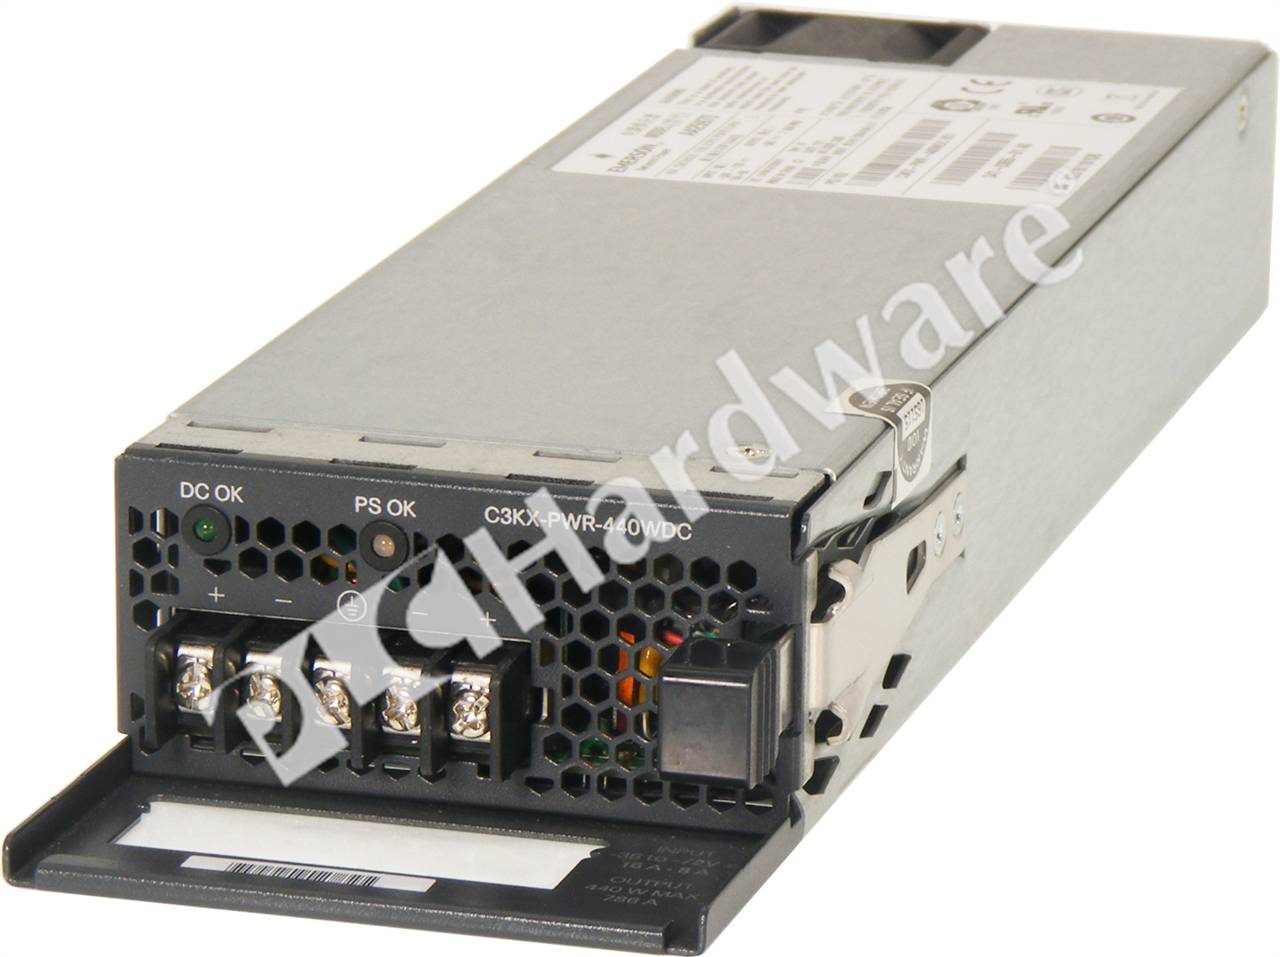 C3KX-PWR-440WDC= / CISCO 440W DC POWER SUPPLY SPARE FOR CATALYST 3750-X SERIES 